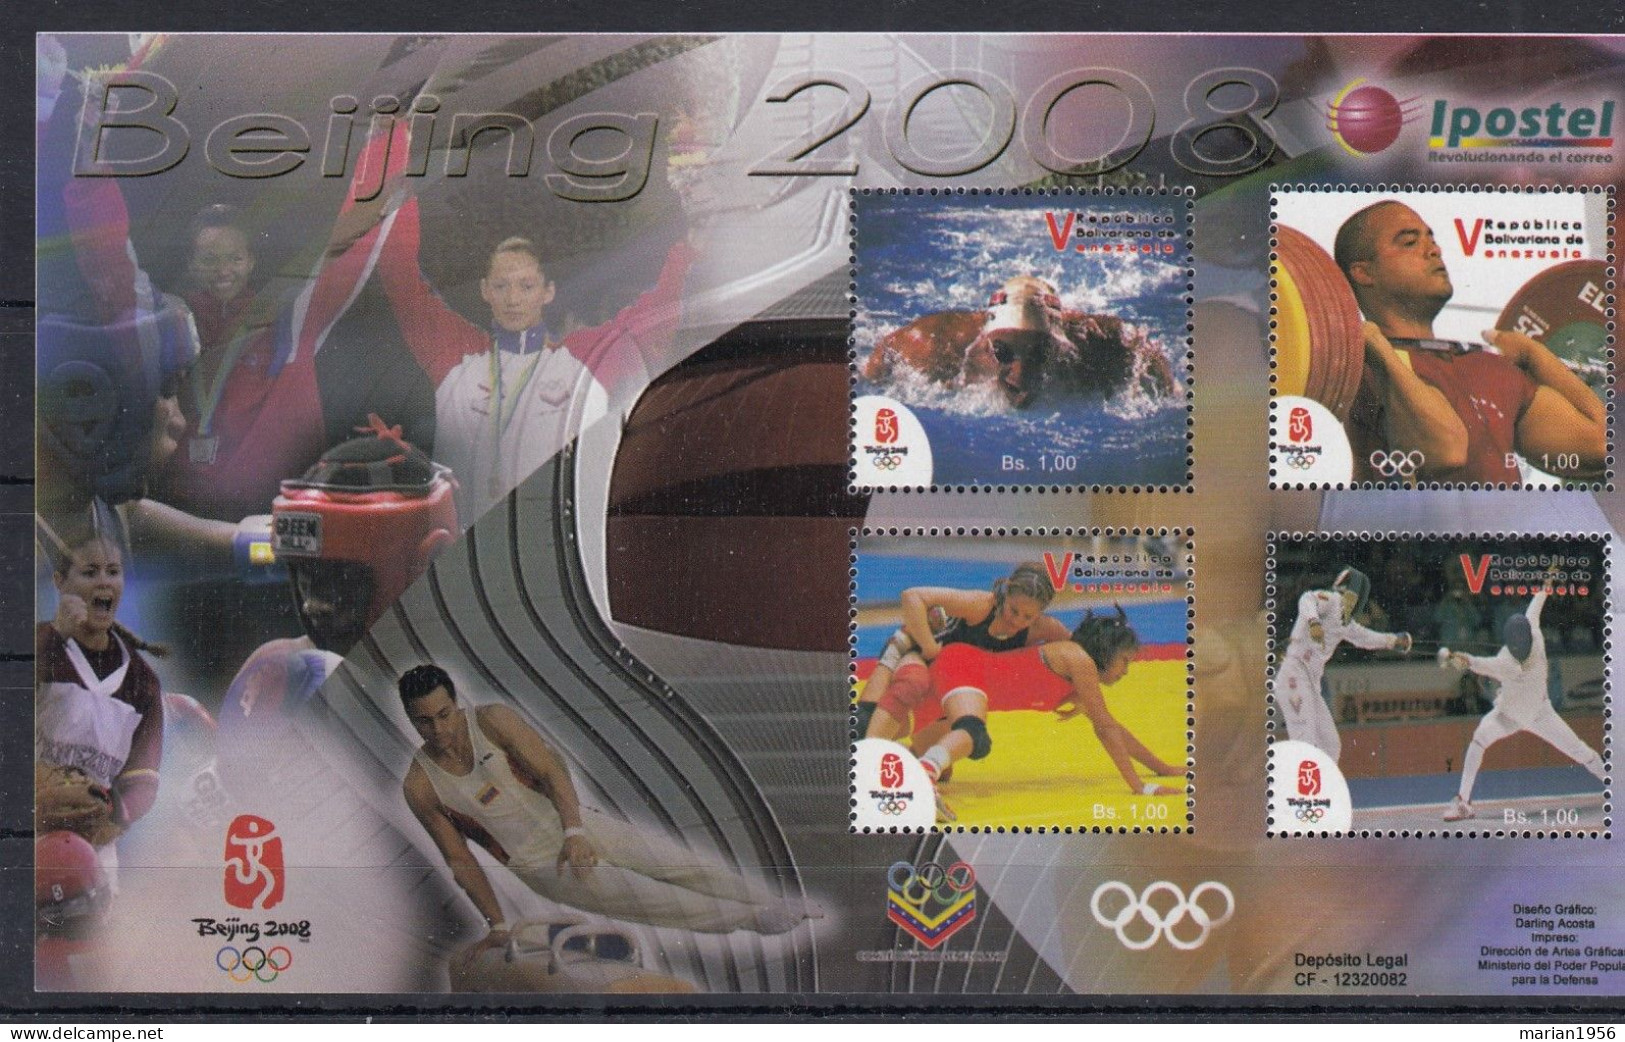 Bolivia 2008 - JEUX OLYMPIQUES D'ETE BEIJING - BF XL - MNH - Sommer 2008: Peking